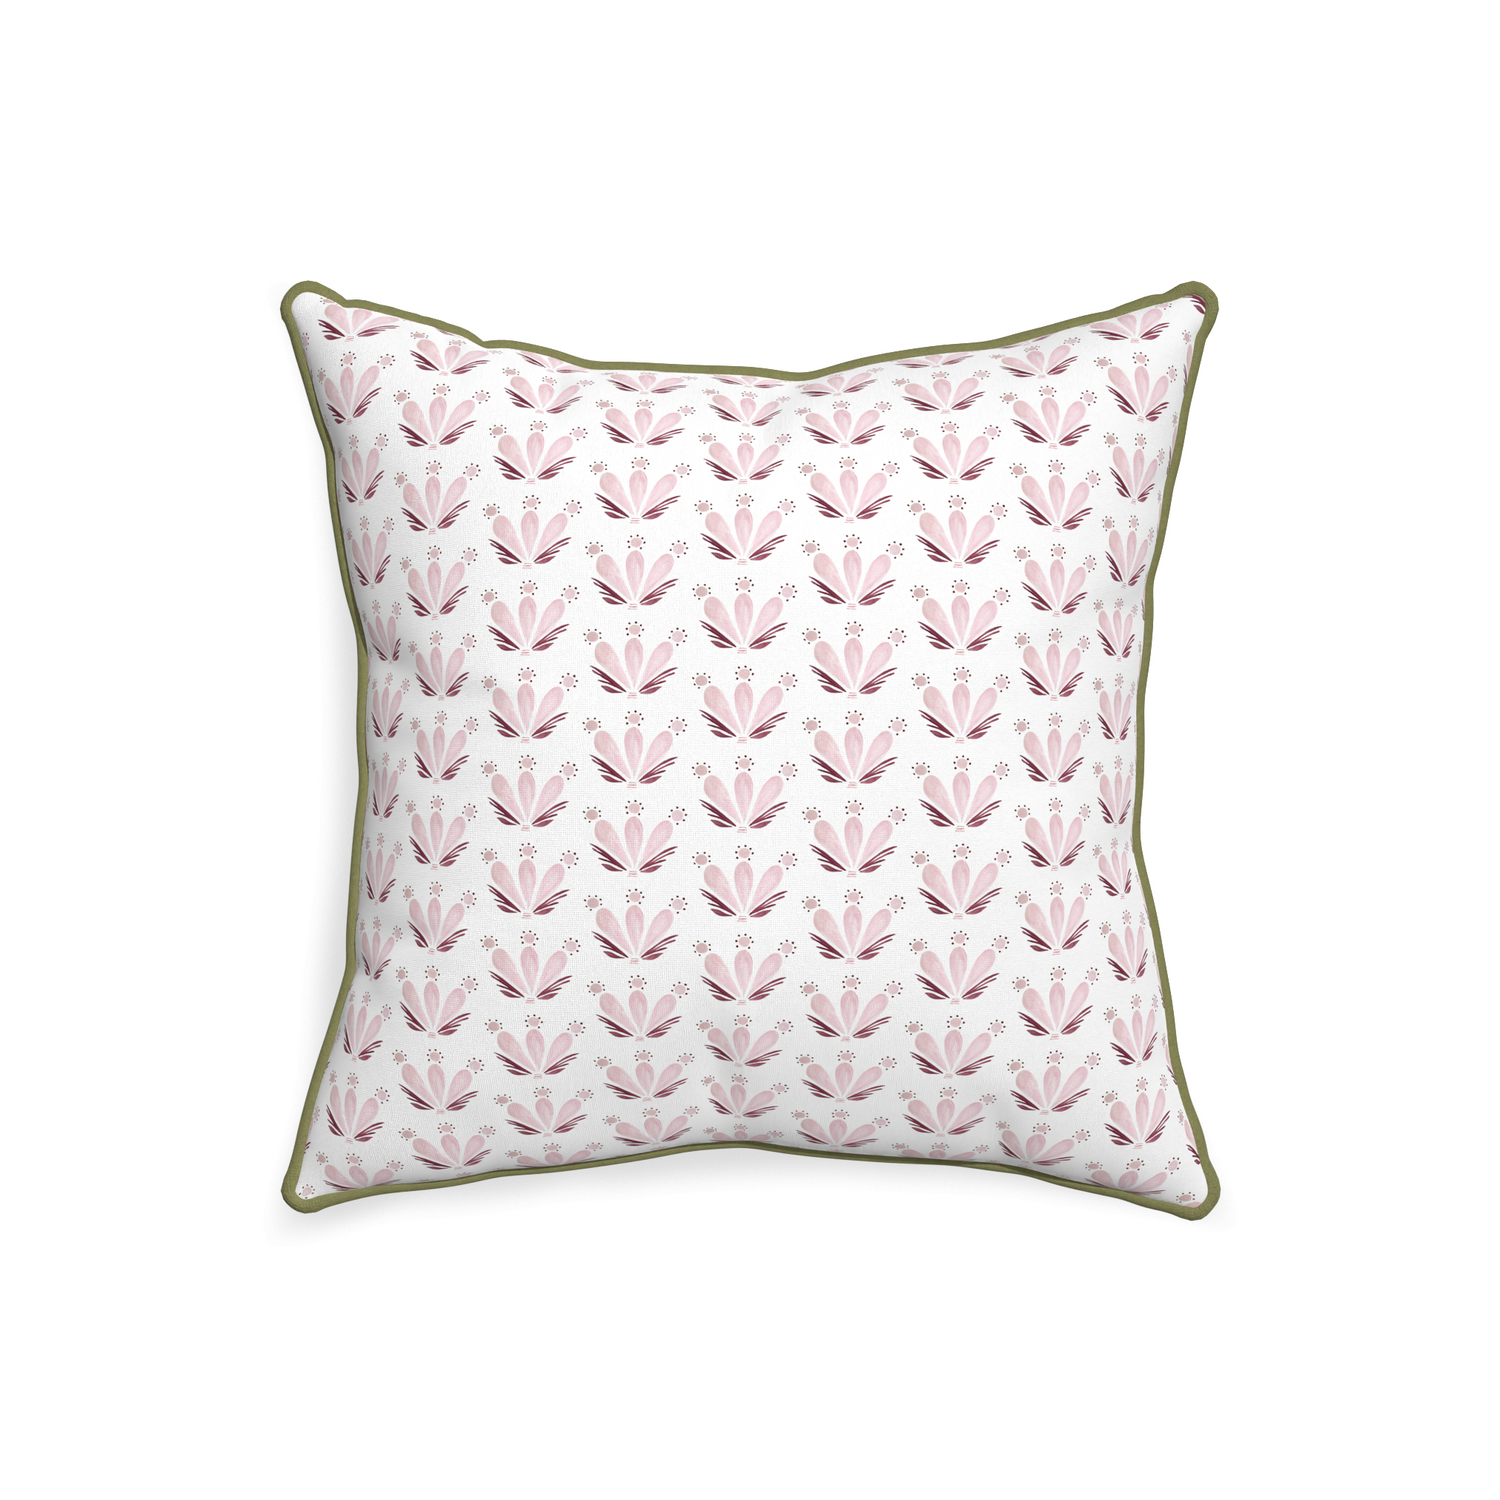 20-square serena pink custom pillow with moss piping on white background